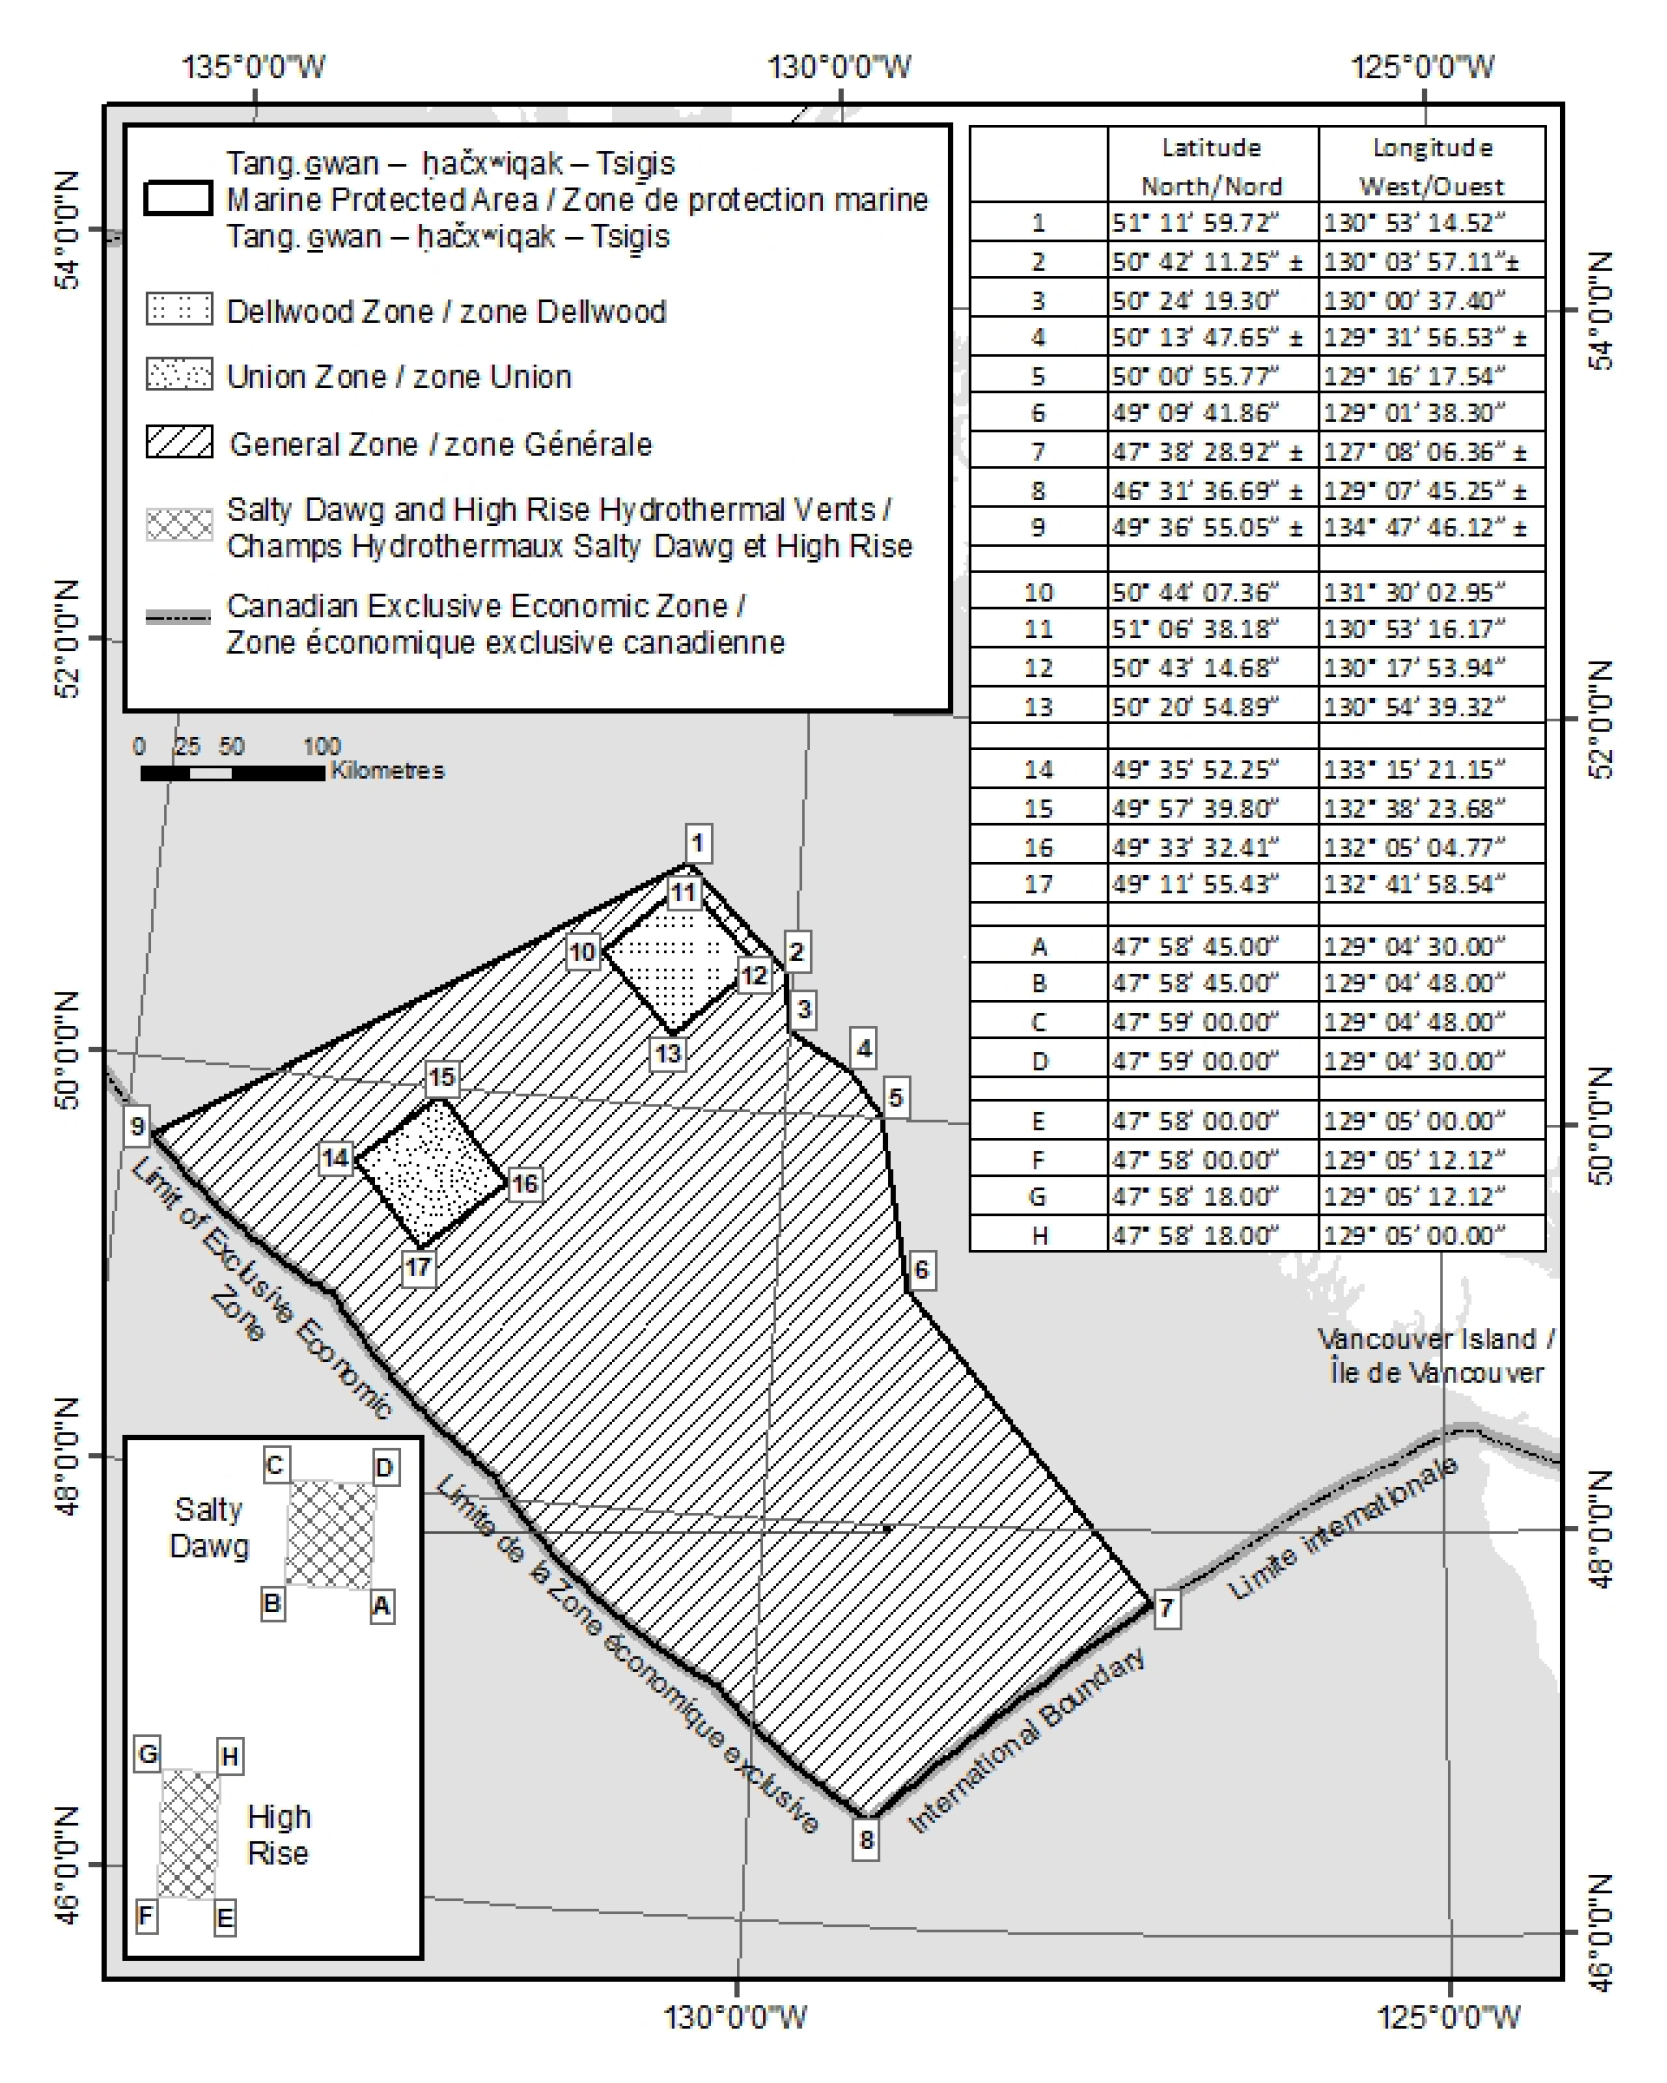 Figure 2: MPA boundary with geographic coordinates and zoning approach. – Text version below the image